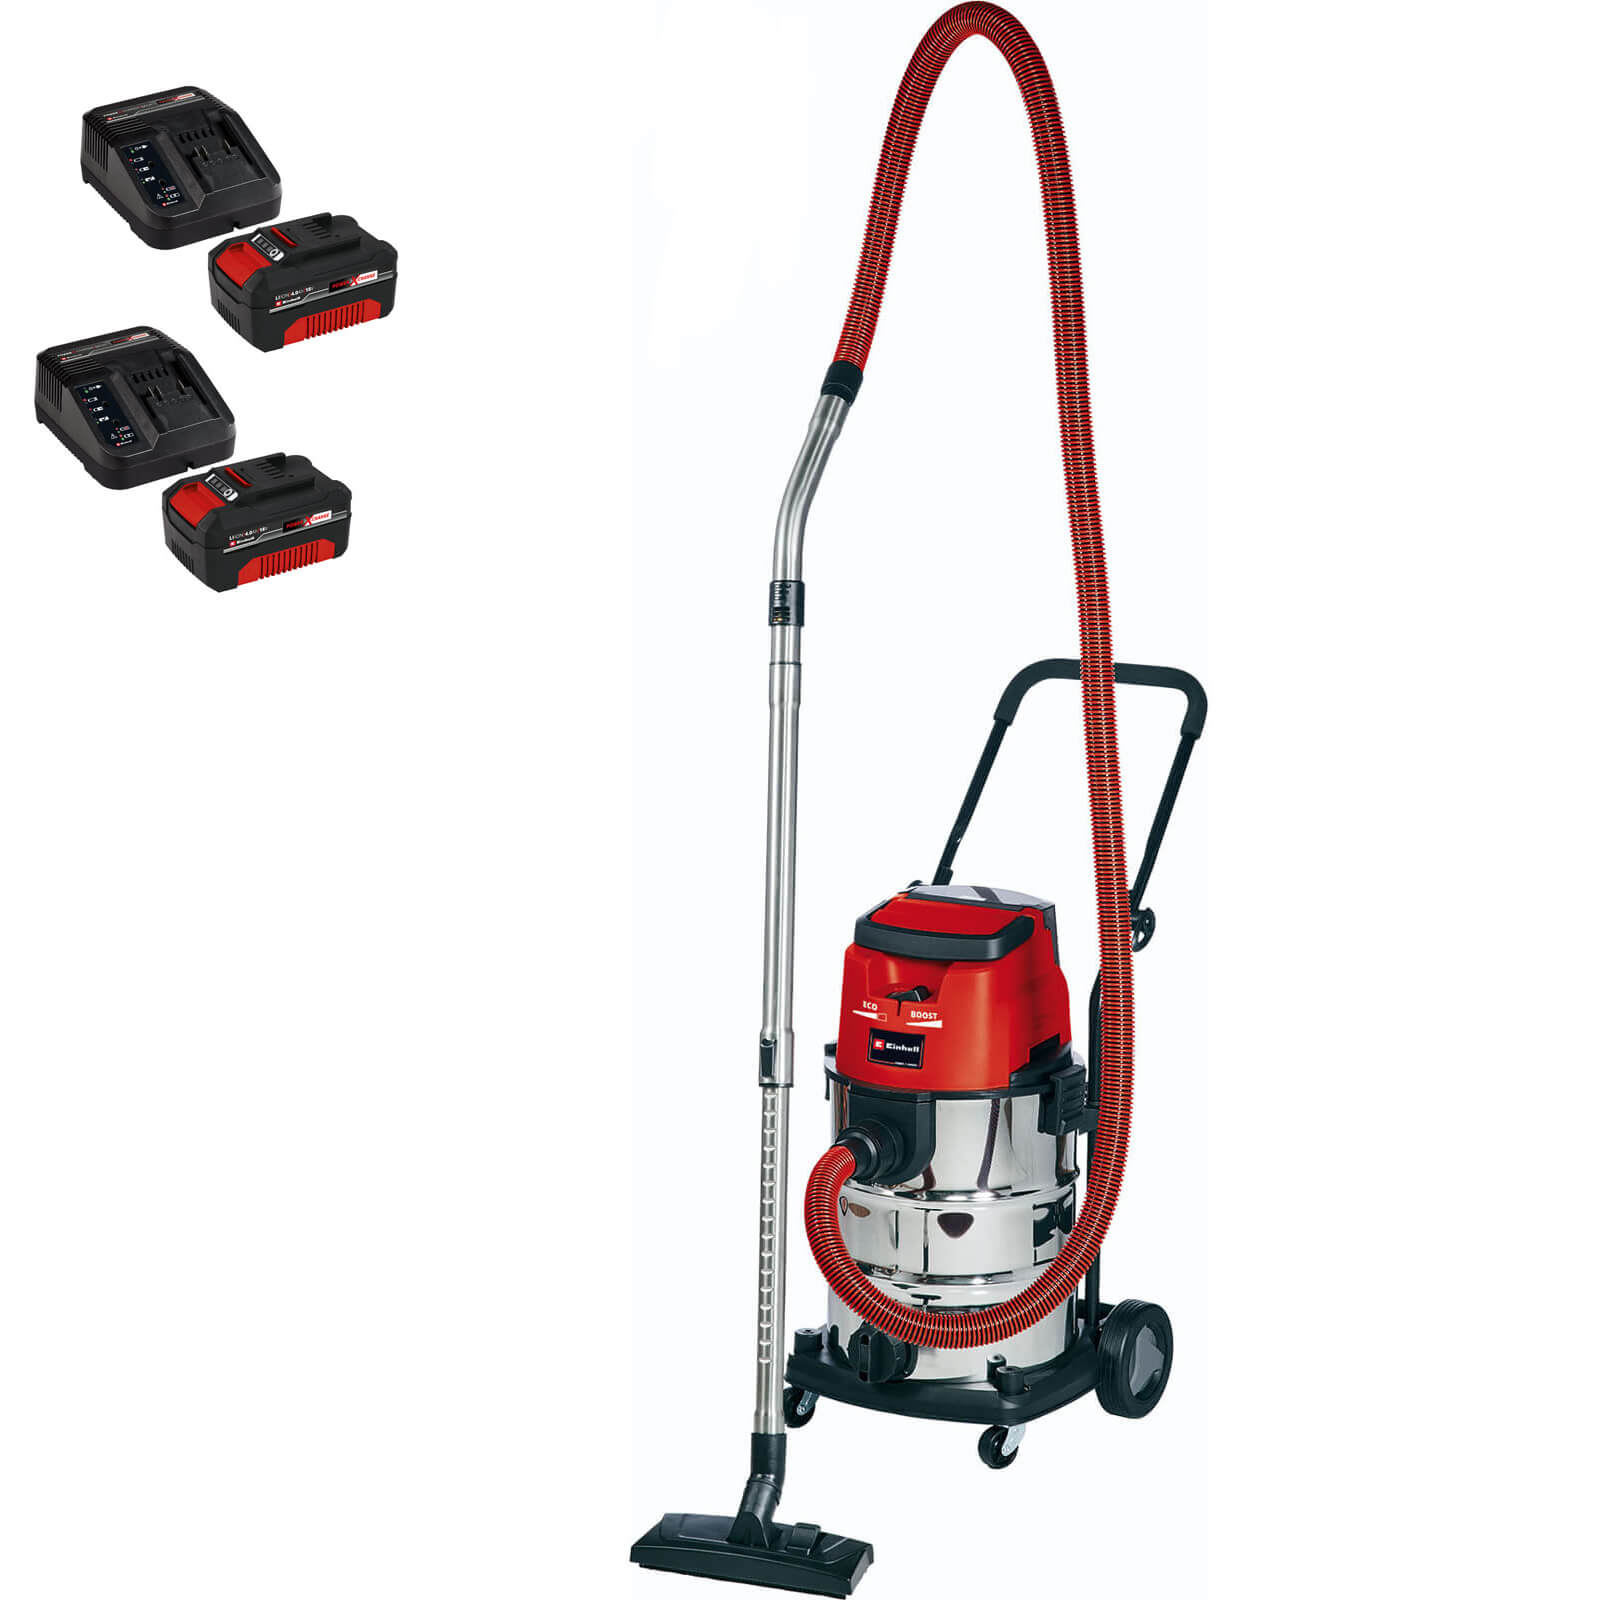 Image of Einhell TE-VC 36/30 Li S 36v Cordless Stainless Steel Wet and Dry Vacuum Cleaner 30L 2 x 4ah Li-ion Charger